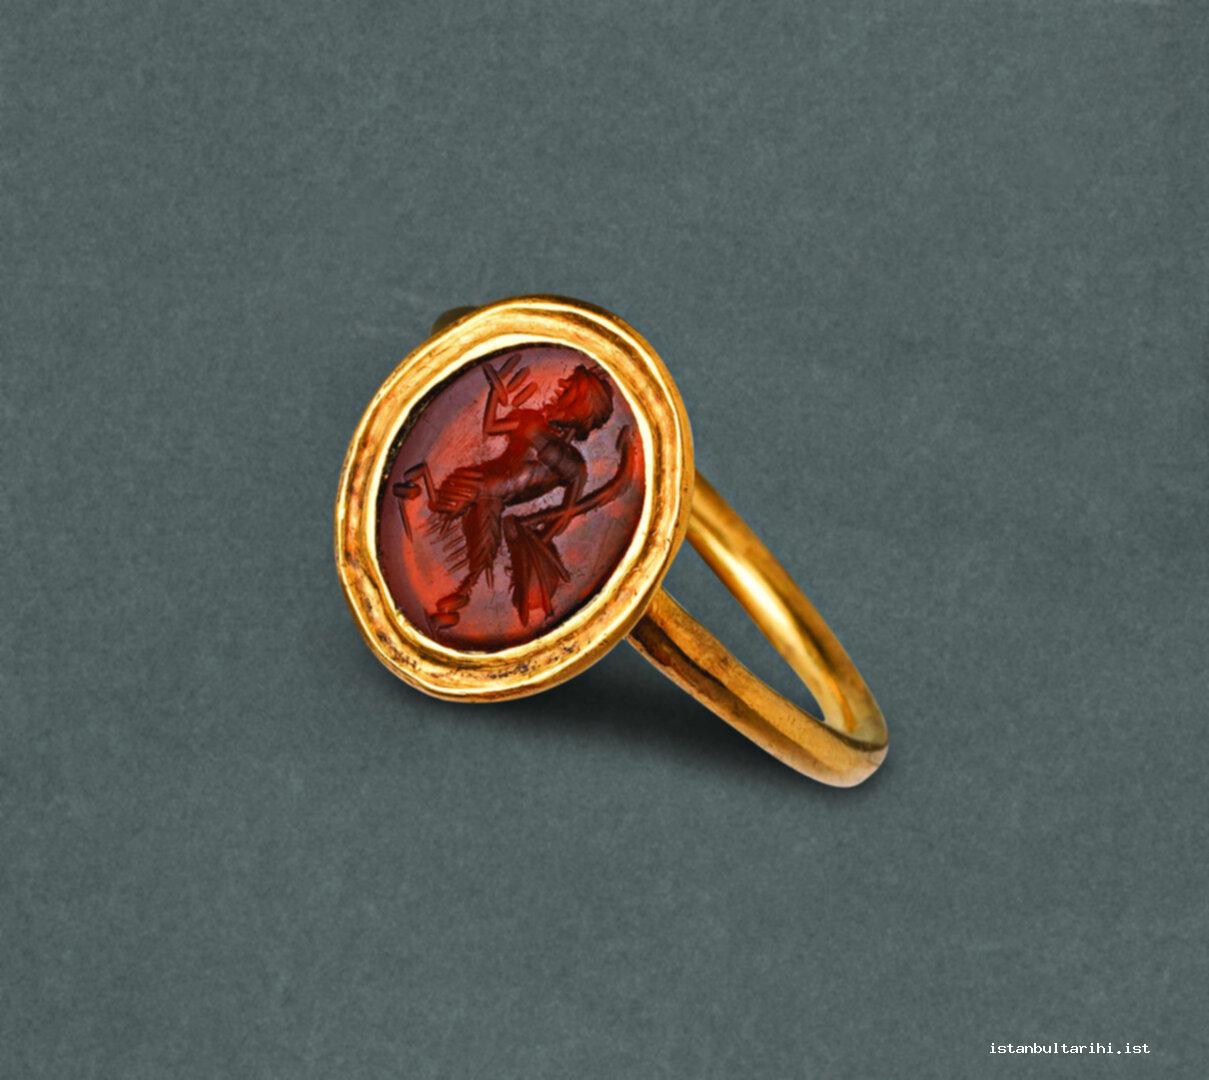 25- Gold ring with carnelian stone